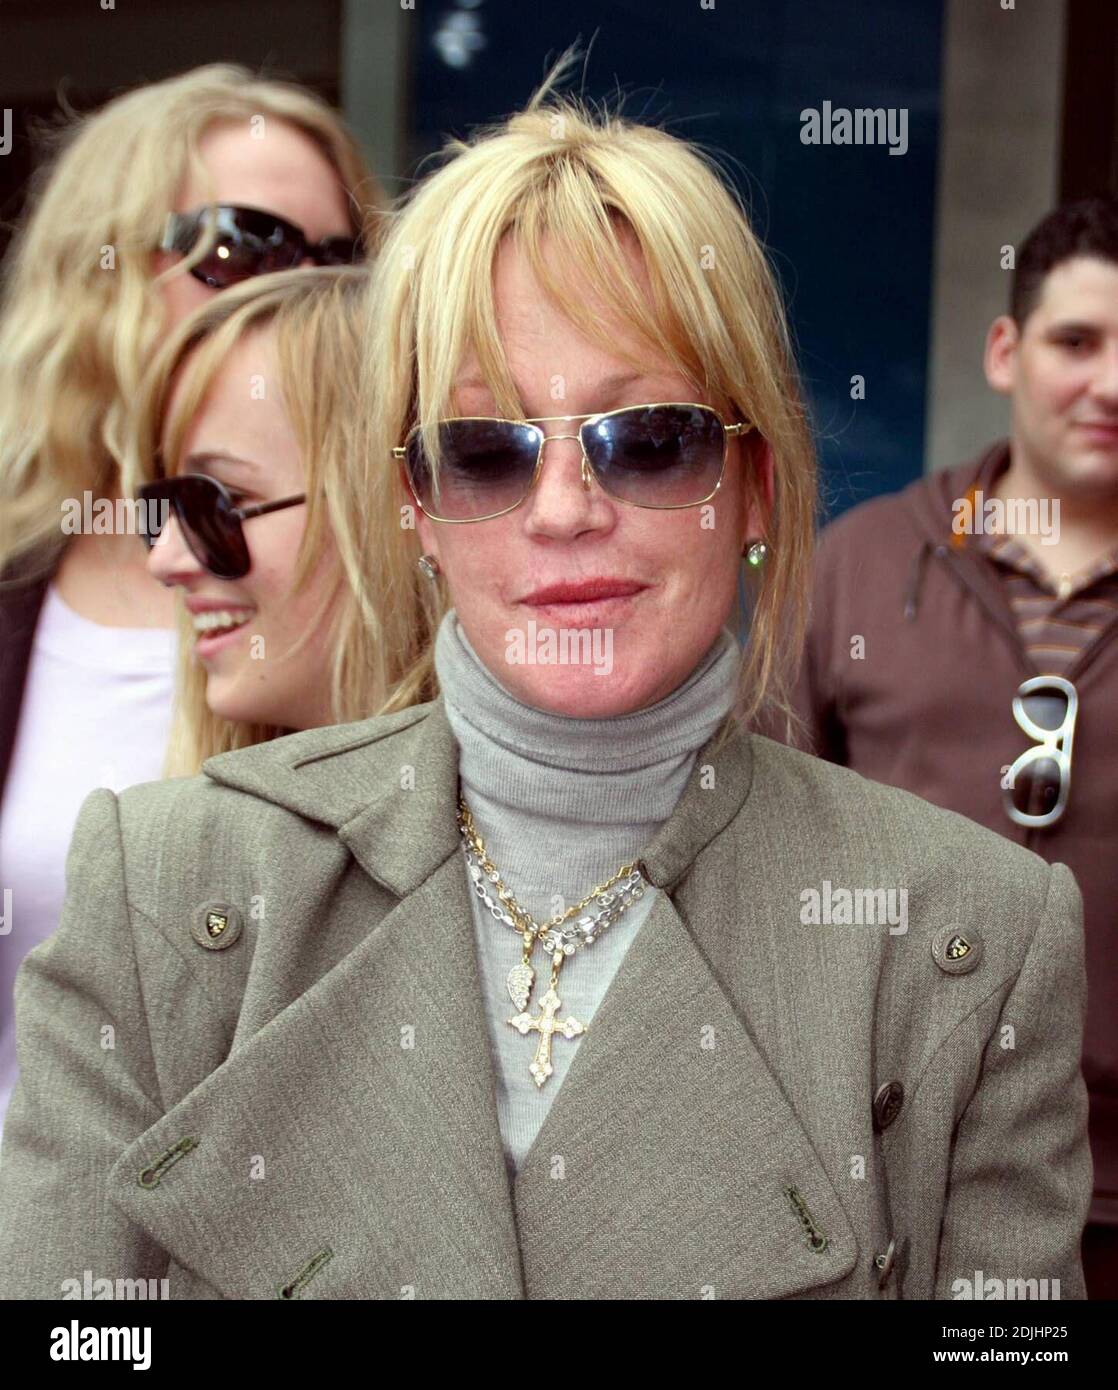 After a crowd formed outside Kitson clothing store in Los Angeles to see Melanie Griffith, the actress seized the moment to do some PR for her son Alexander Bauer's rock band 'Slander' by handing out flyers for his next concert on May 3 2006 at The Gig in Los Angeles, Ca.  4/22/07. Stock Photo